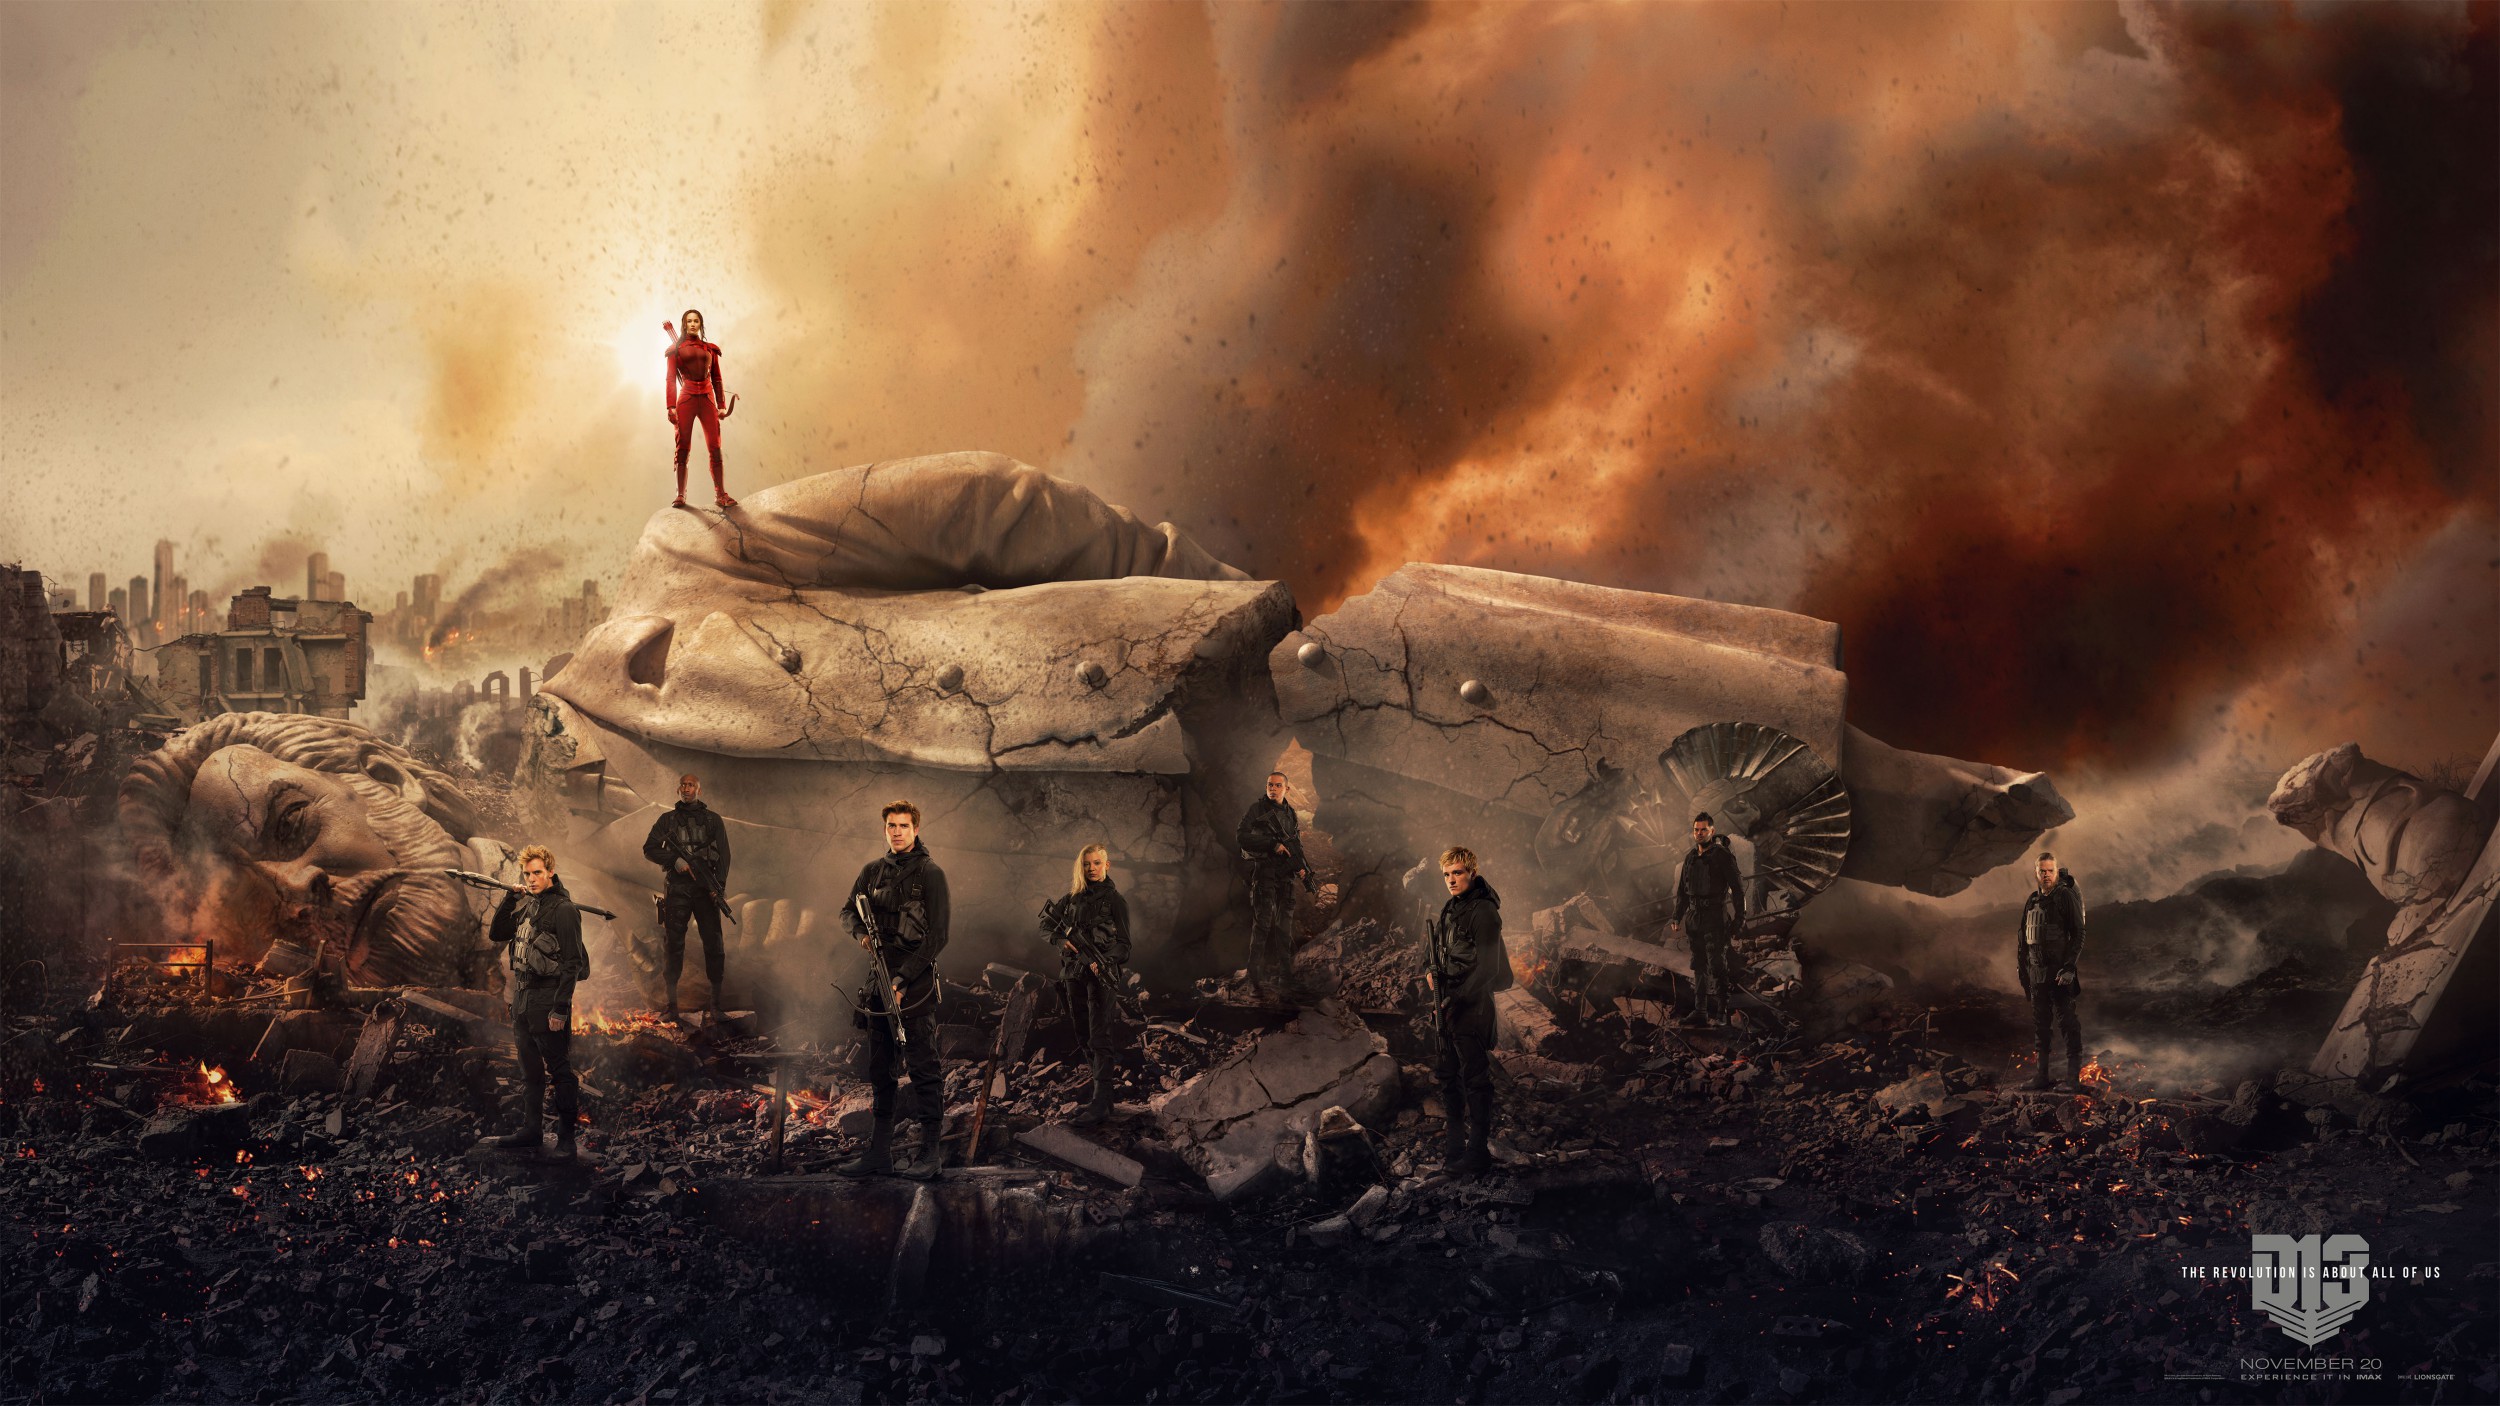 Mega Sized Movie Poster Image for The Hunger Games: Mockingjay - Part 2 (#19 of 29)